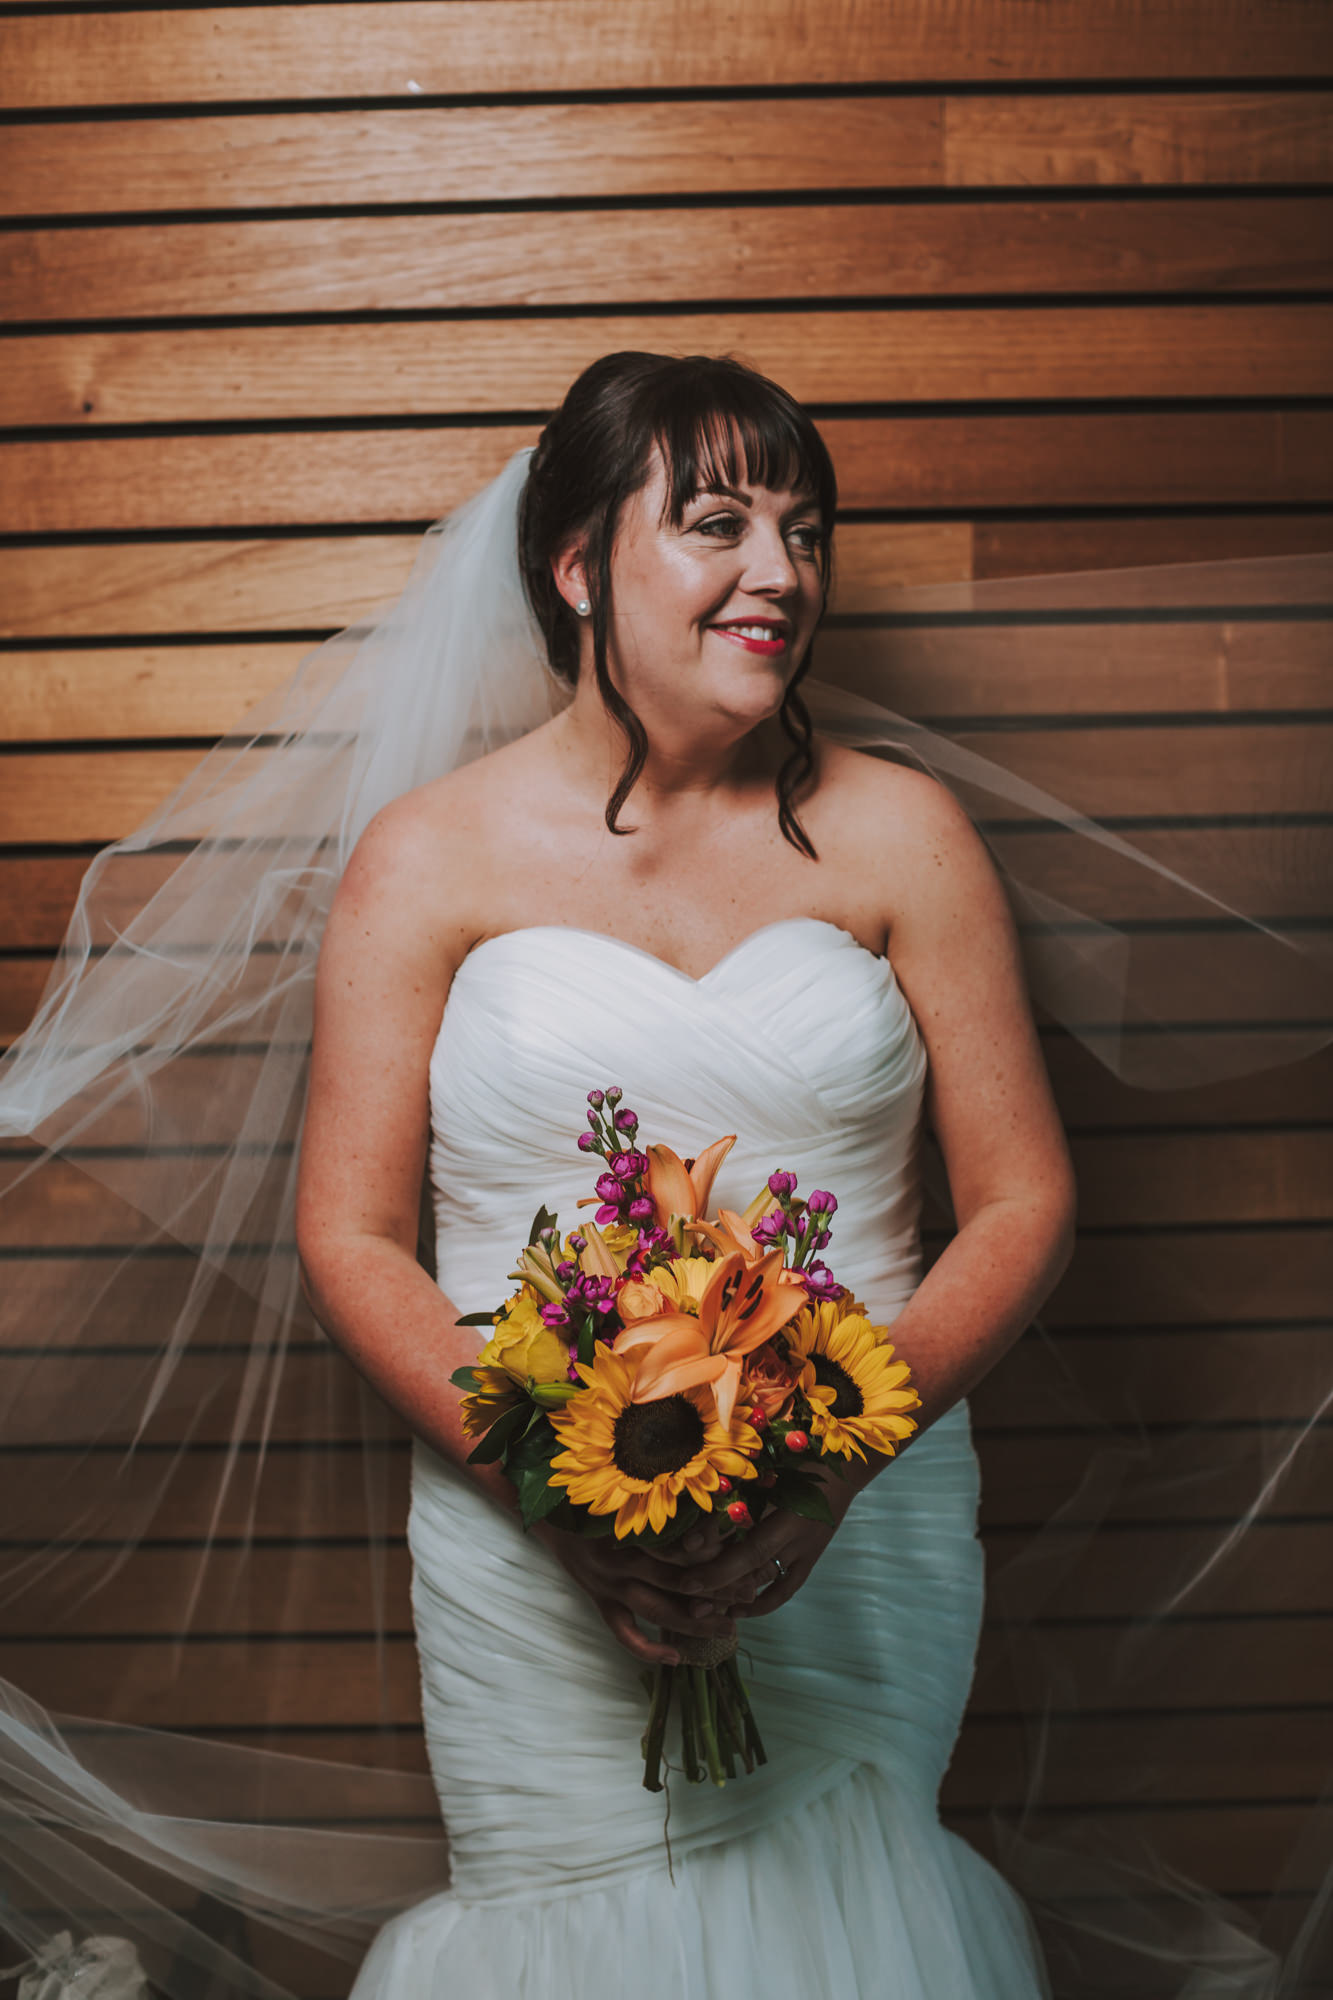 crown hotel bawtry wedding photographers in doncaster, yorkshire-13.jpg